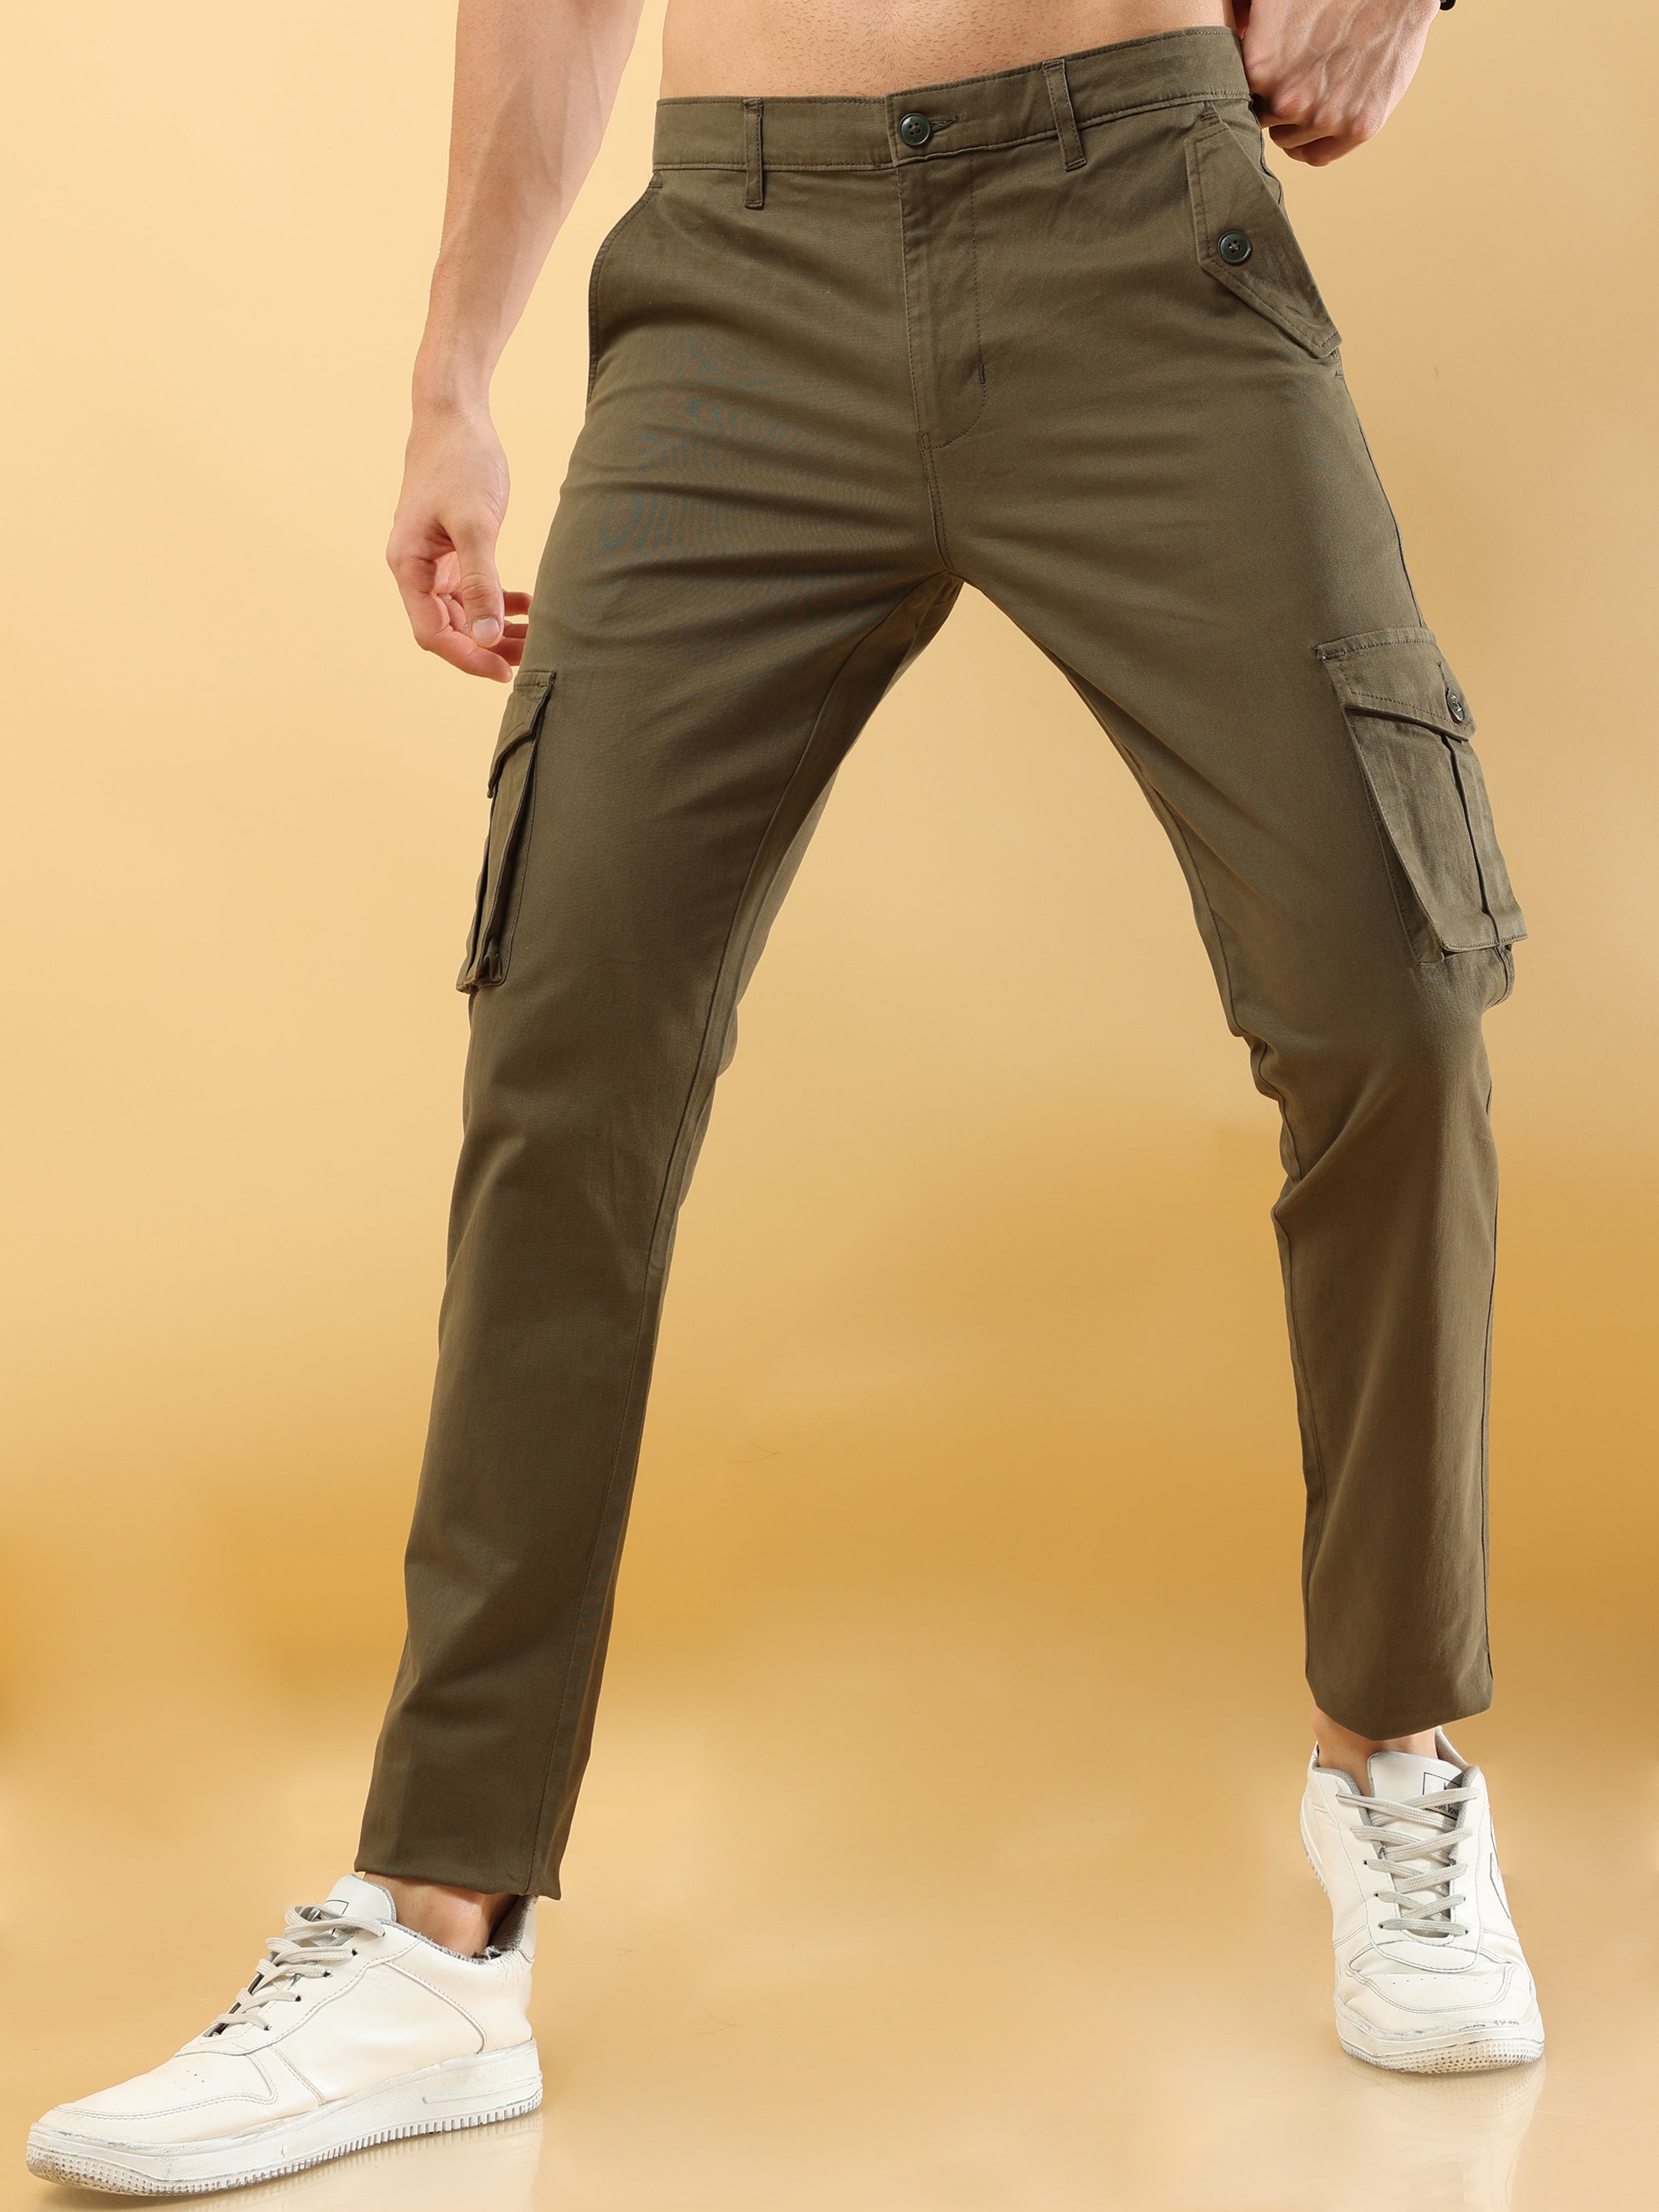 Olive Green Cargo Pants Mens 